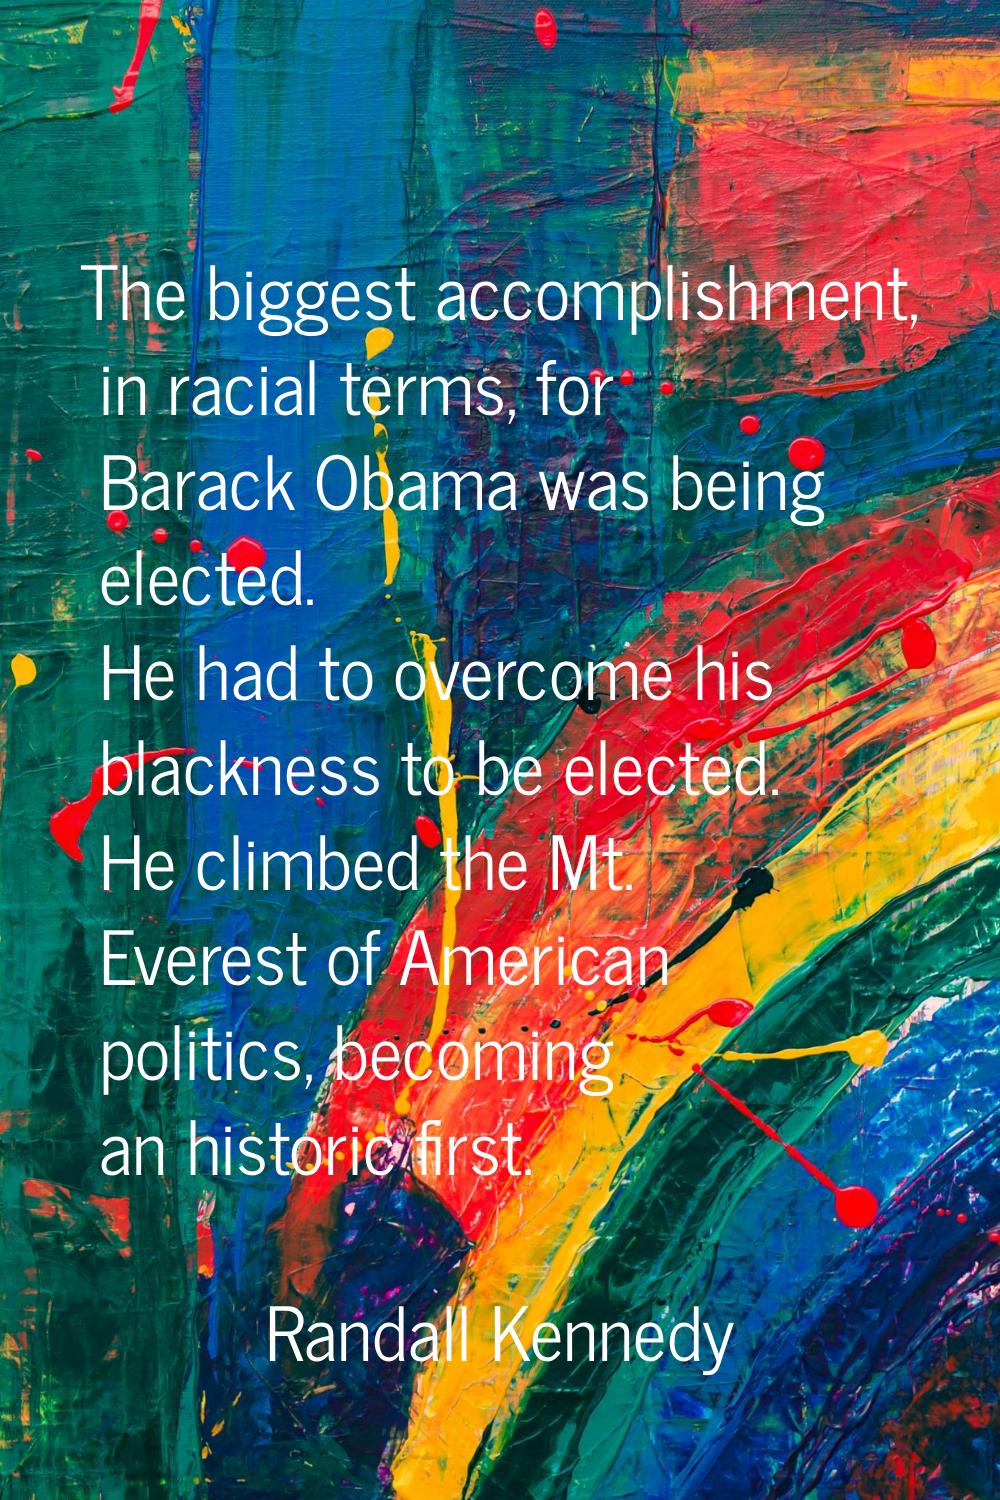 The biggest accomplishment, in racial terms, for Barack Obama was being elected. He had to overcome